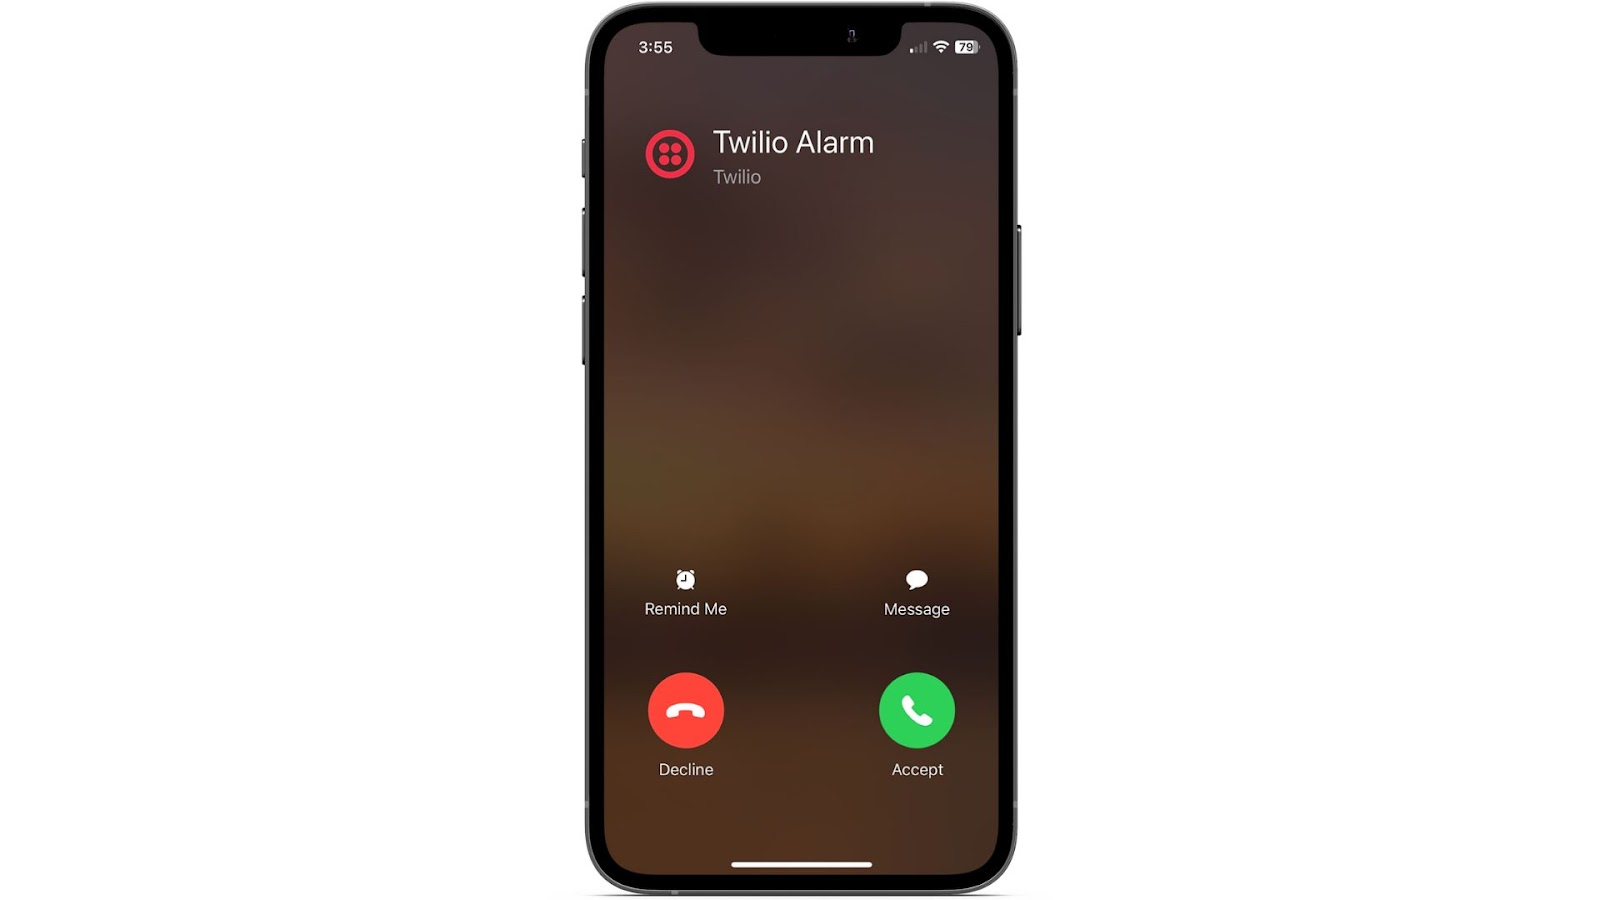 Phone displaying a phone call from "Twilio Alarm"